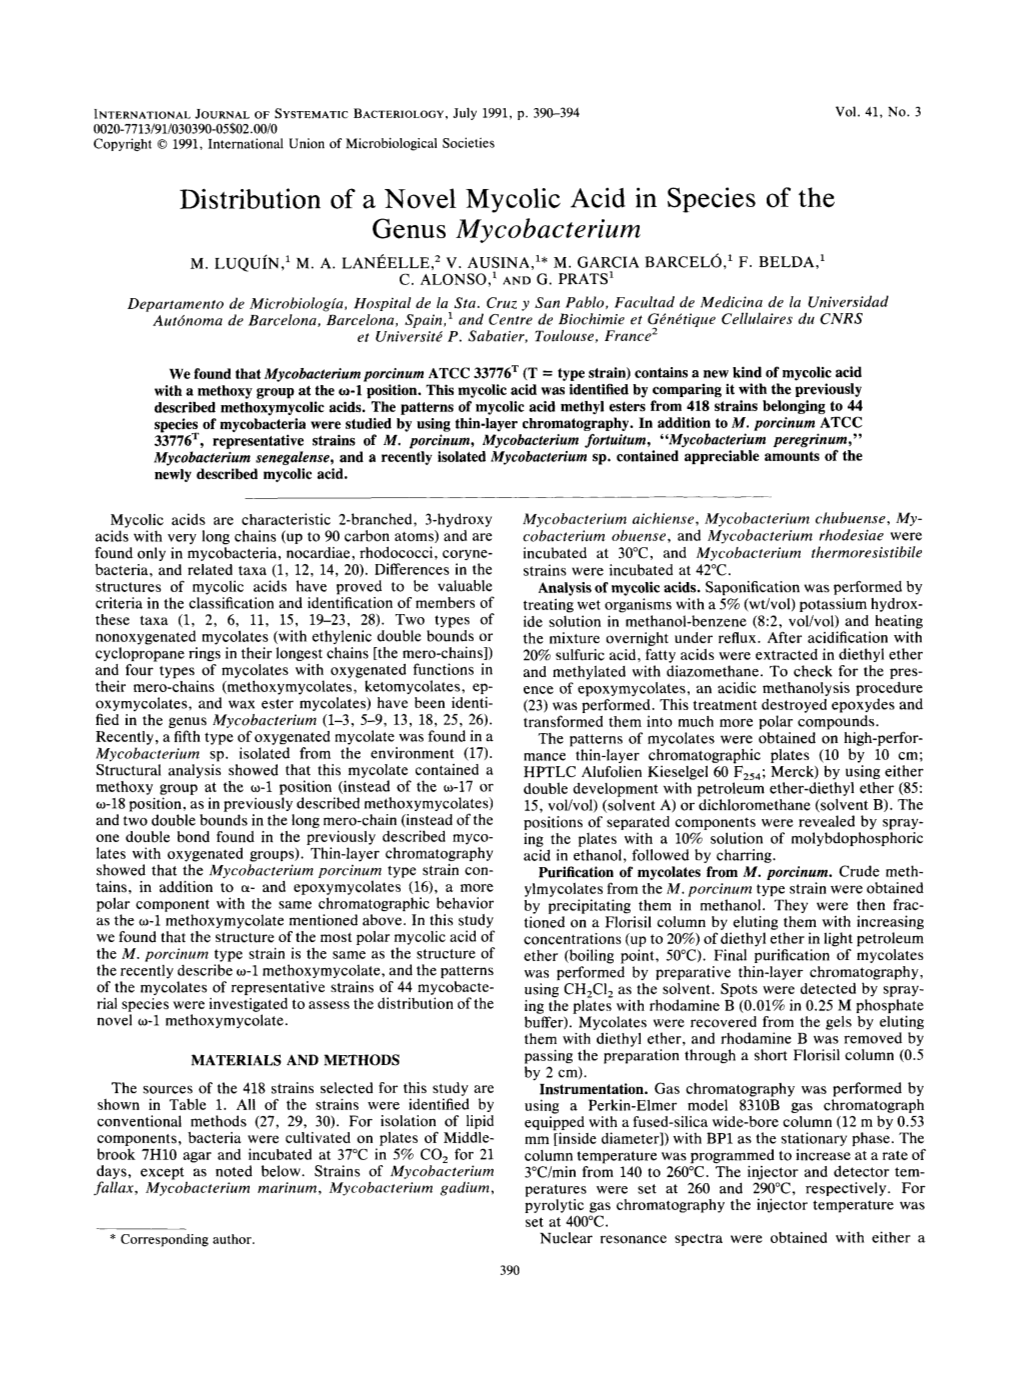 Distribution of a Novel Mycolic Acid in Species of the Genus Mycobacterium M